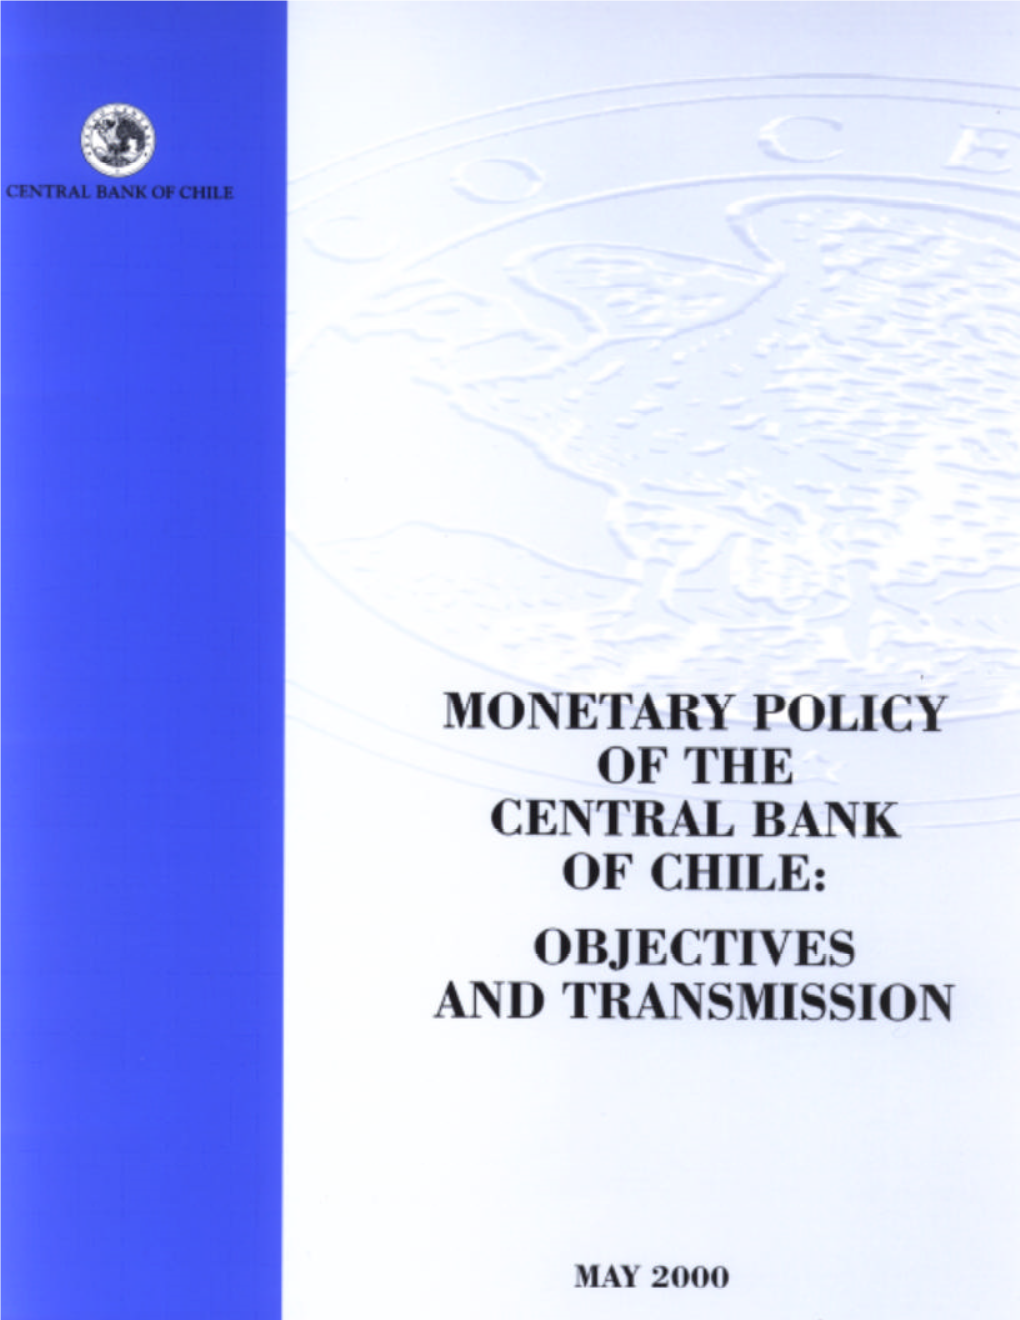 Monetary Policy of the Central Bank of Chile: Objectives and Transmission